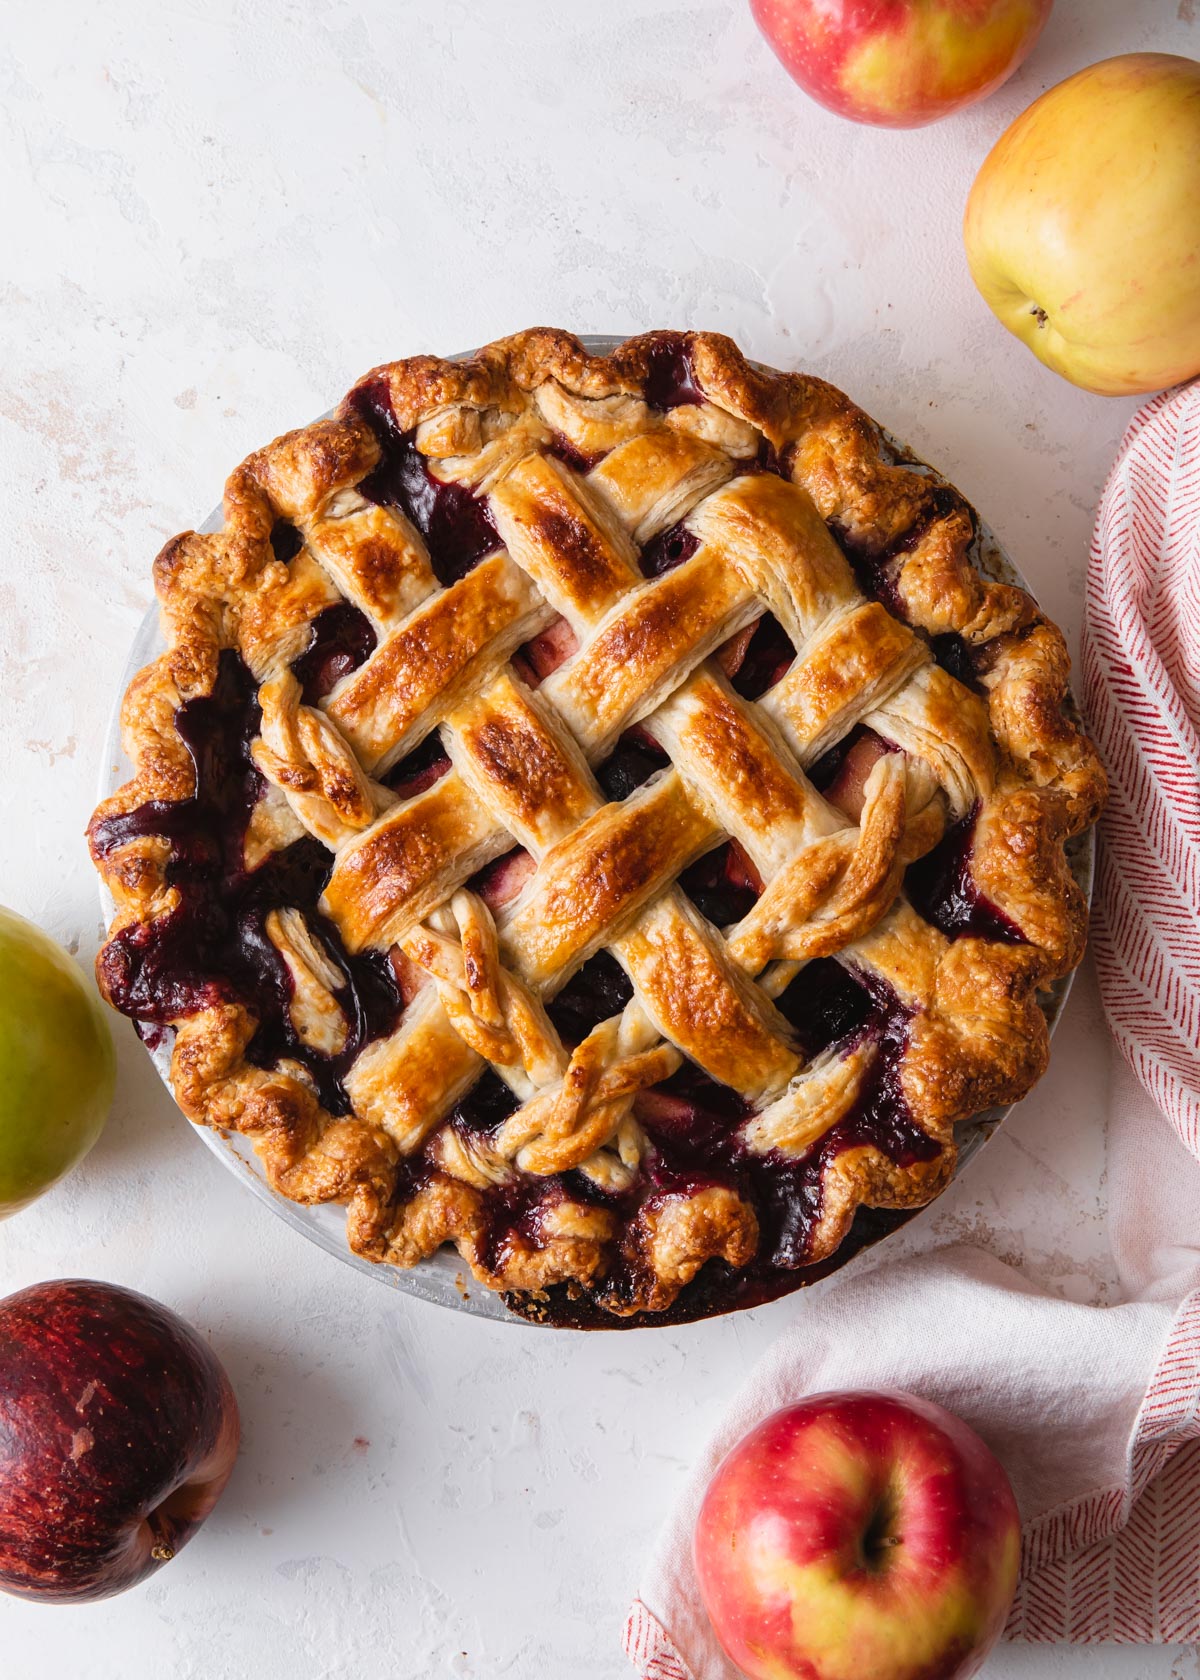 A baked apple blueberry pie with lattice crust